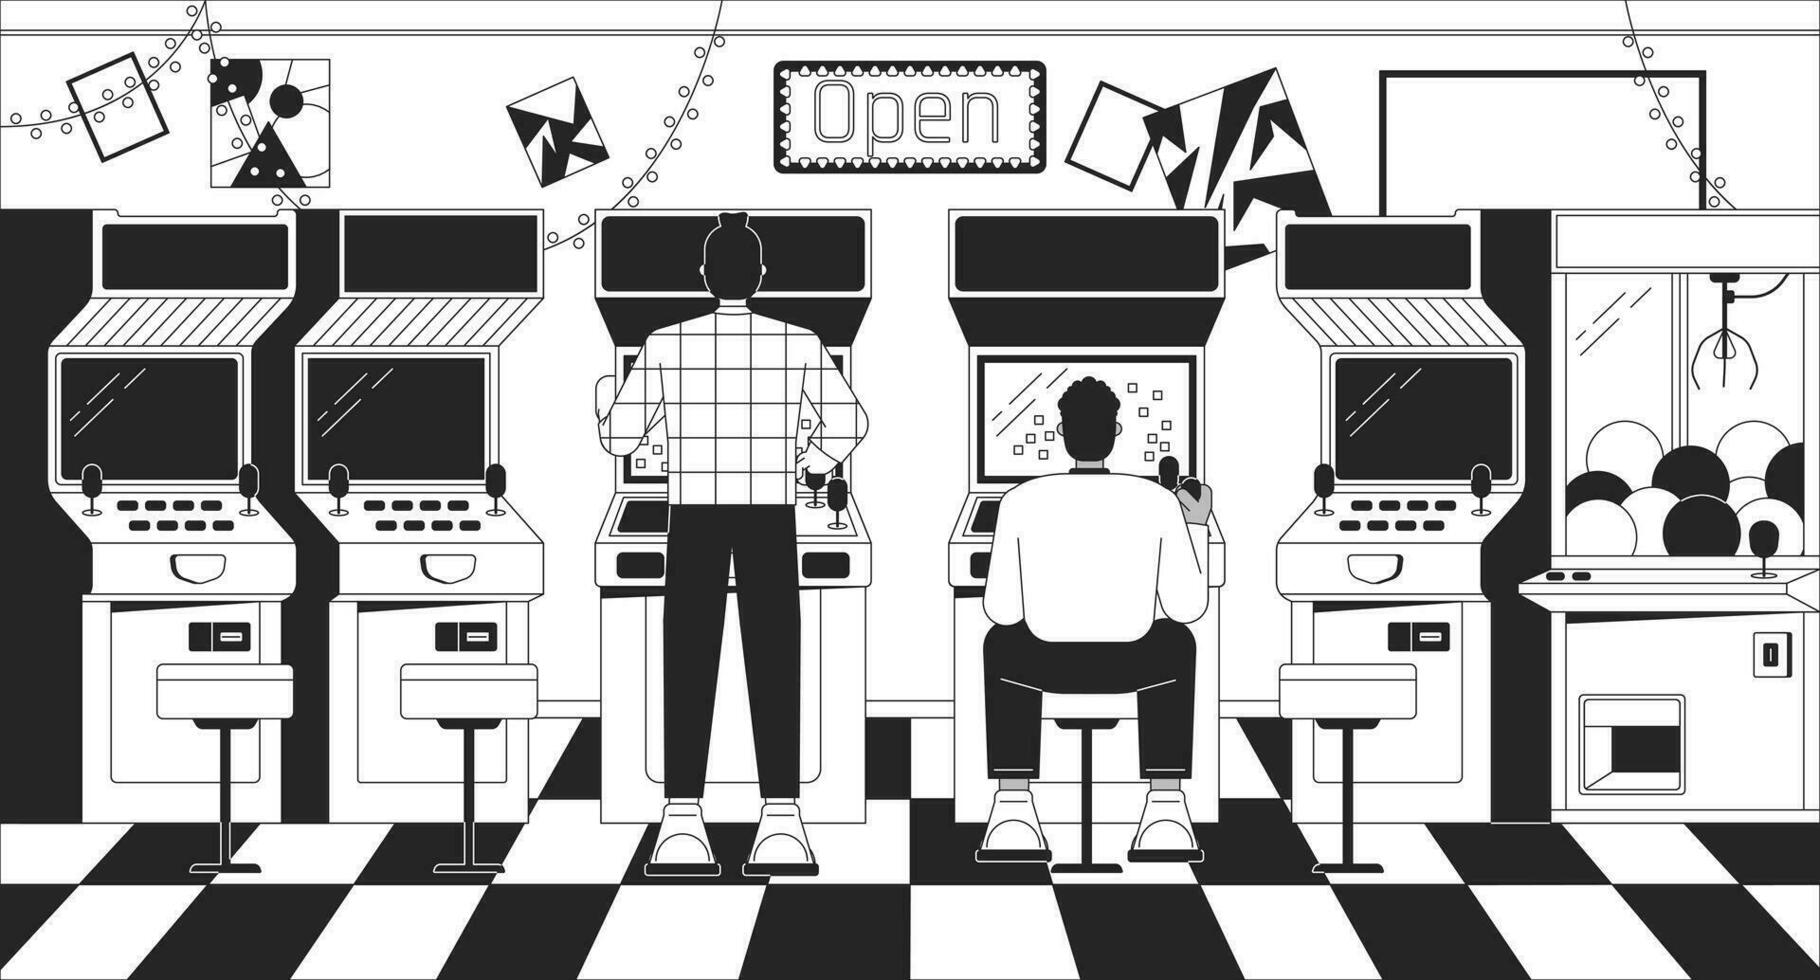 An illustration of two people playing video games in an arcade. - Arcade